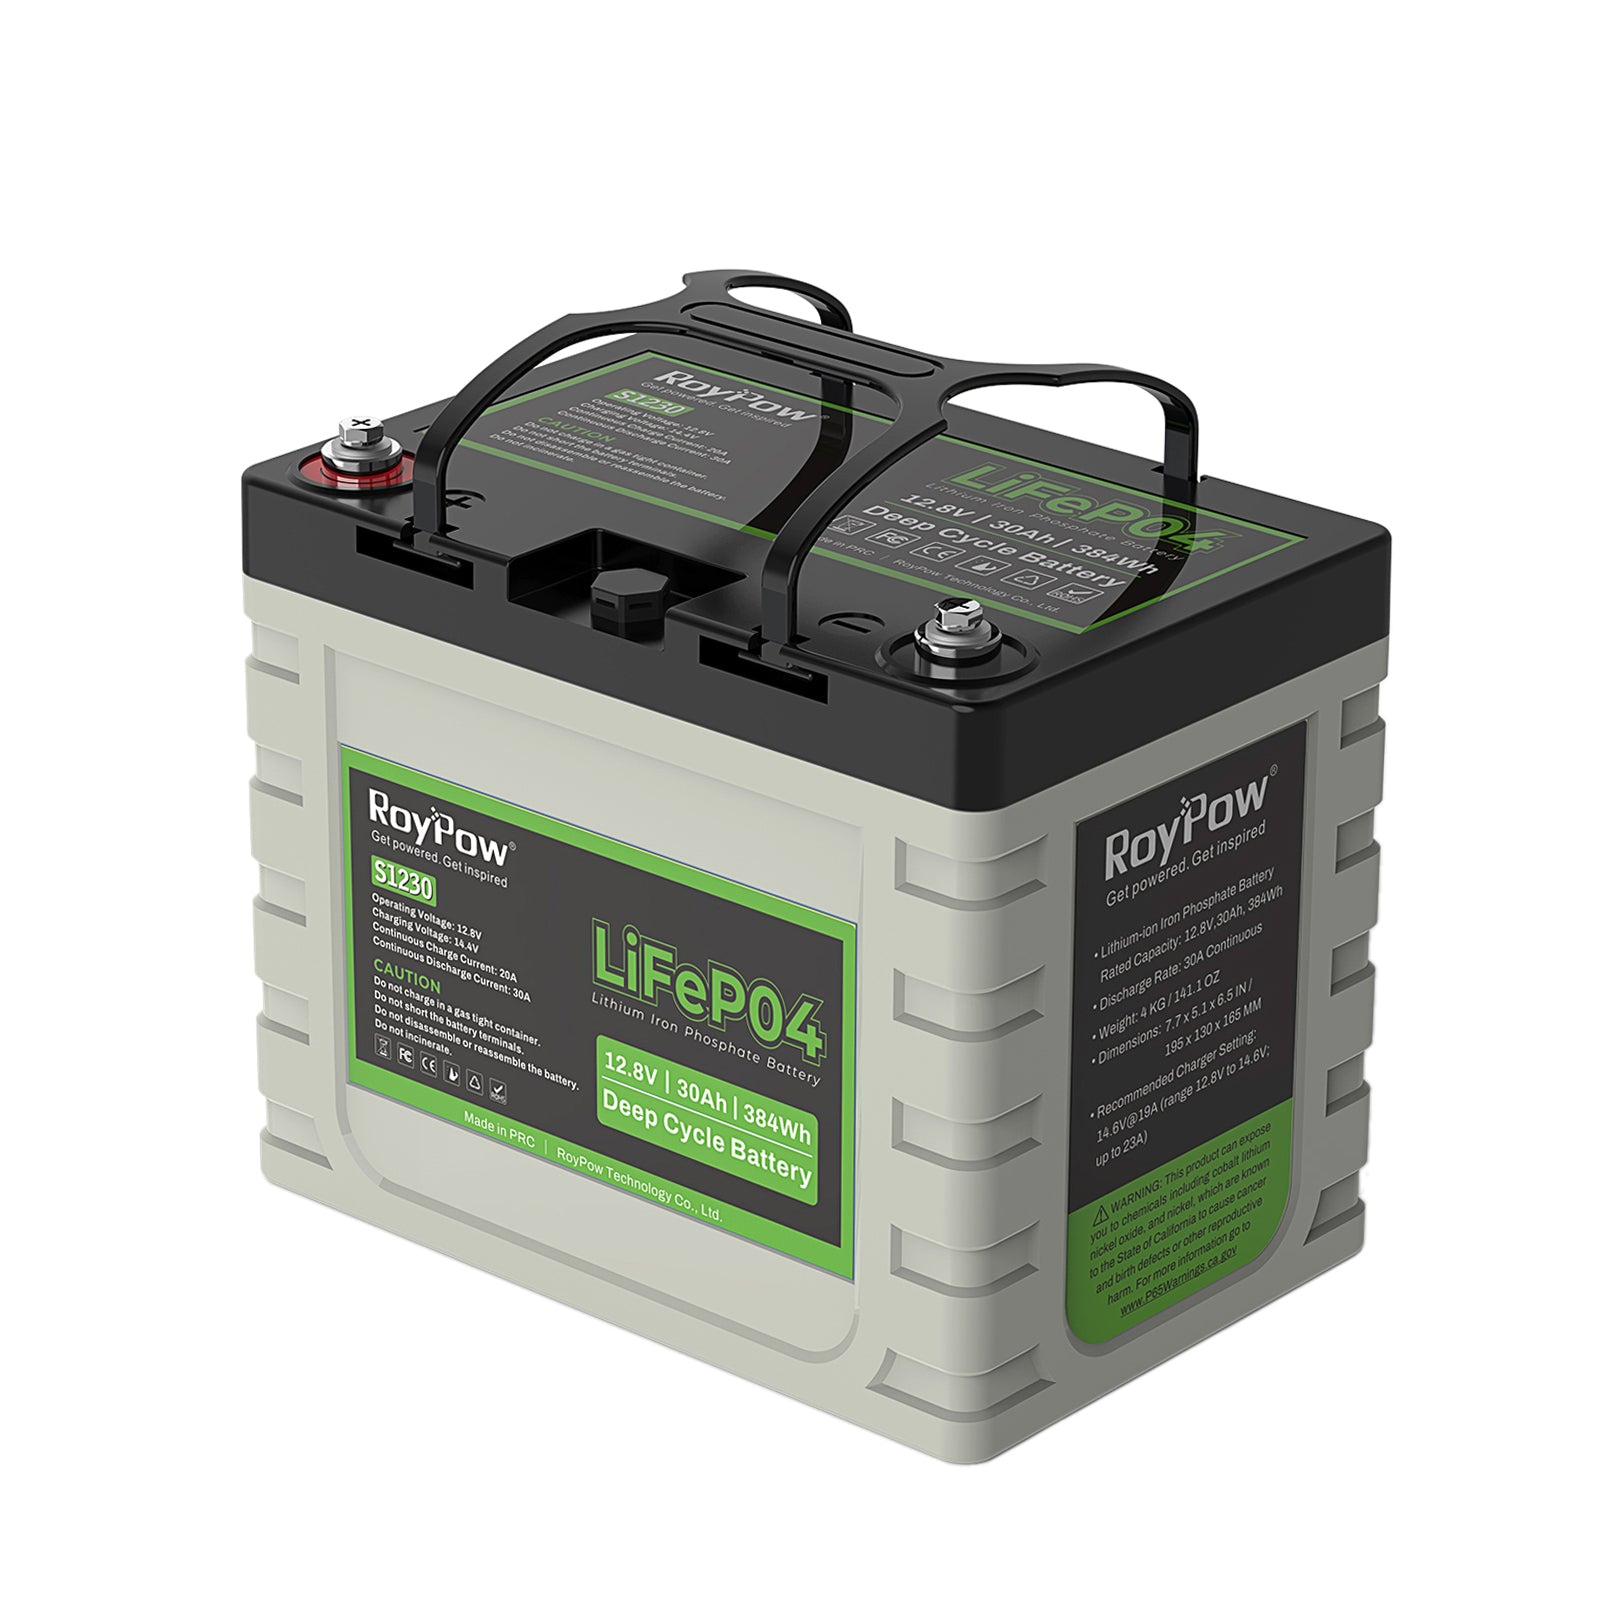 RoyPow 12V 30AH lithium iron phosphate deep cycle rechargeable battery